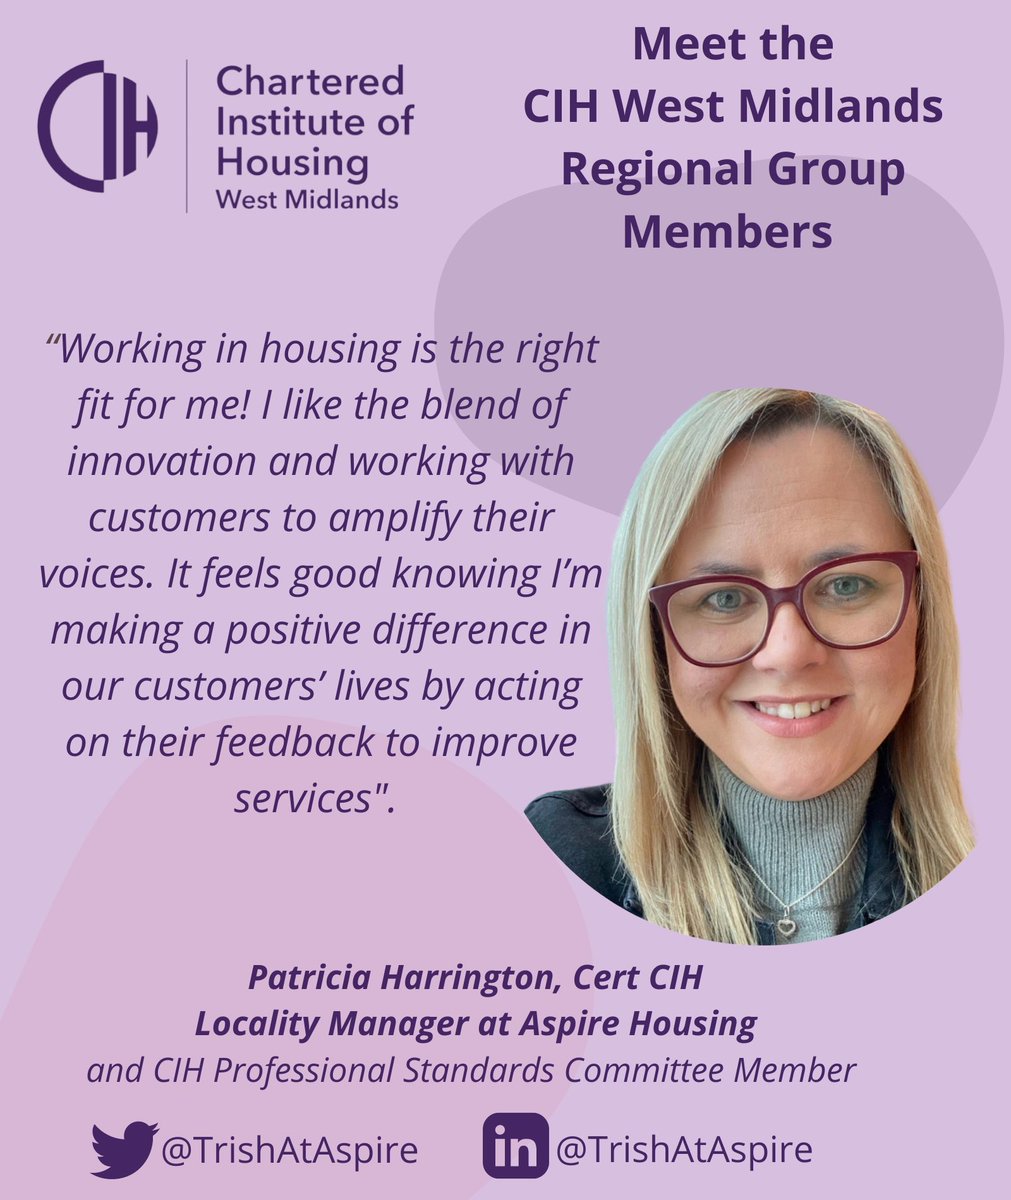 Hi all, Eden here! Hope you are enjoying your Easter Monday break. Our next featured CIH West Midlands Regional group member is Patricia Harrington @TrishAtAspire. She is a Locality Manager from @Aspire_Housing and also a CIH Professional Standards Committee member. #ukhousing